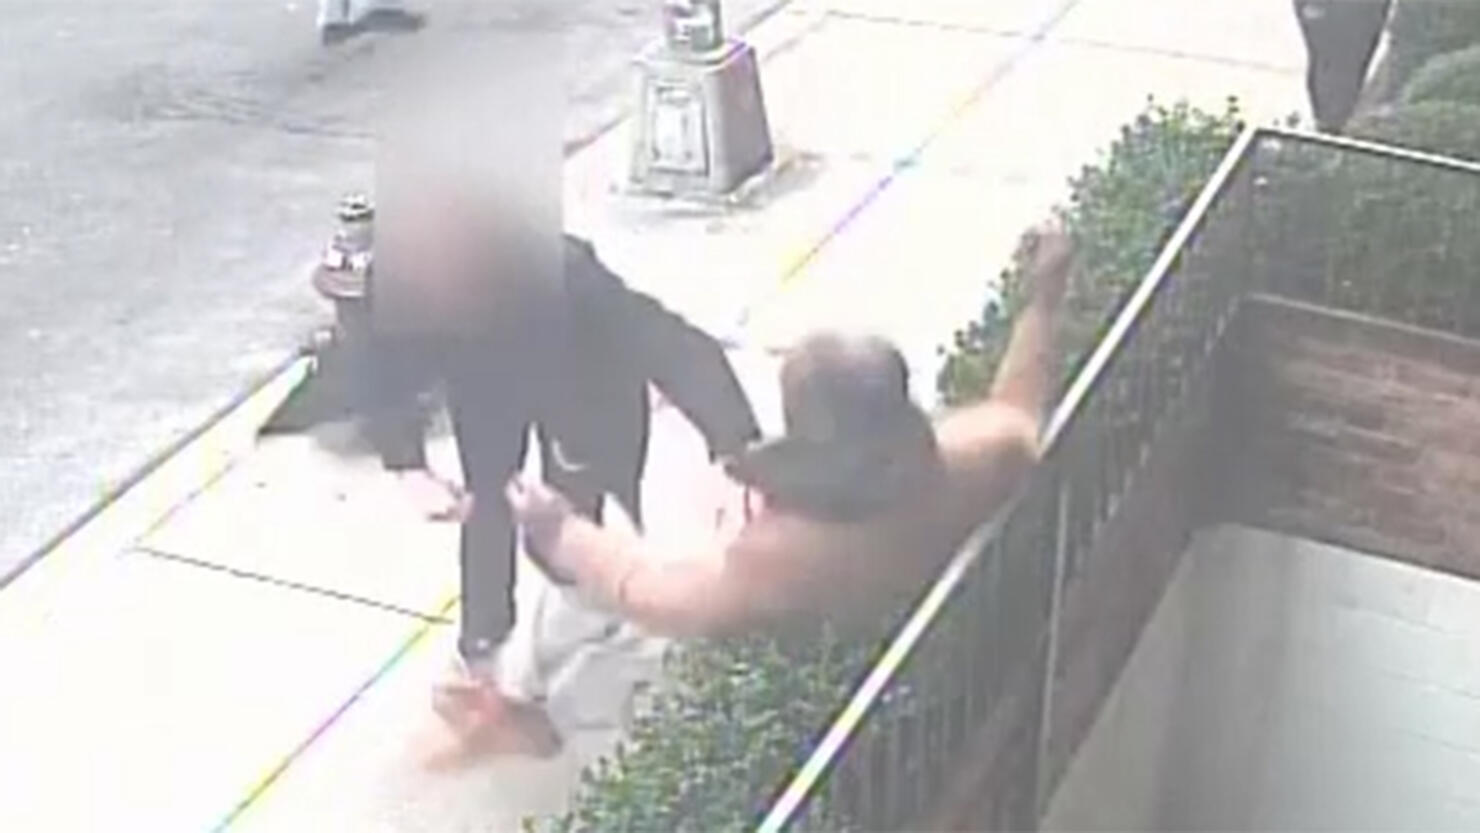 New Yorker Takes Down Armed Suspect